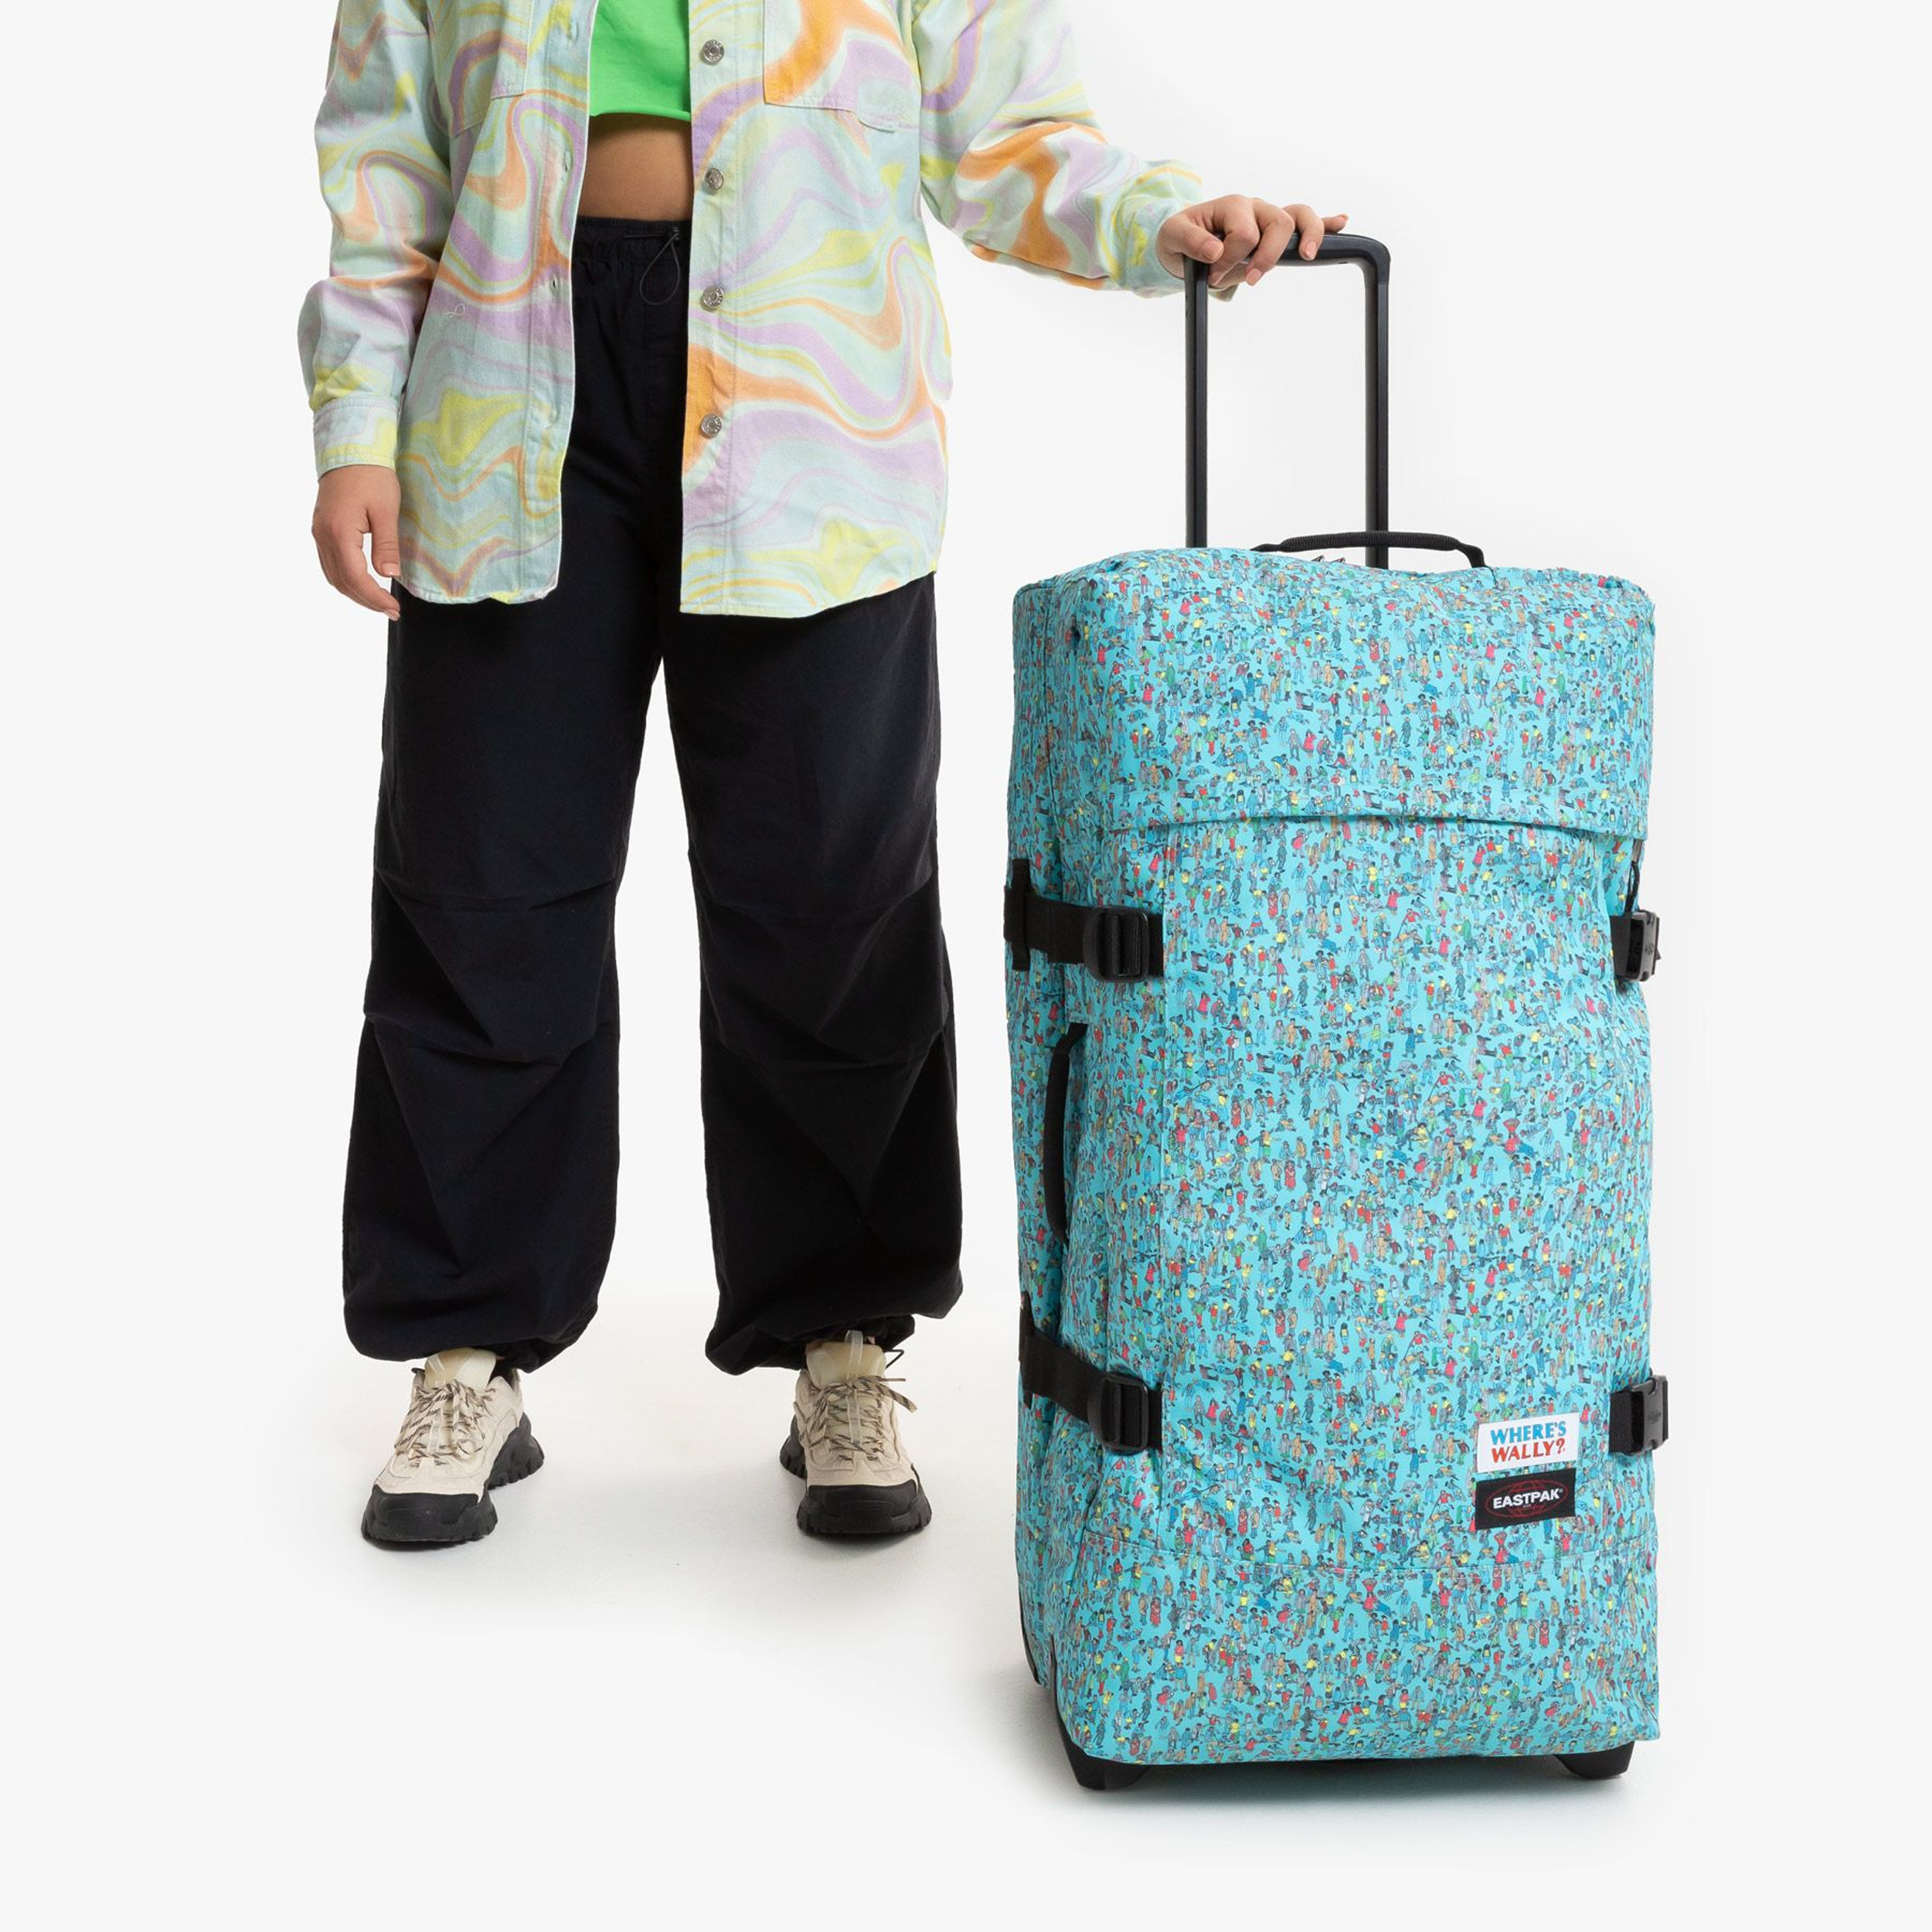 EASTPAK TRANVERZ S Wally, Turquoise Men's Luggage